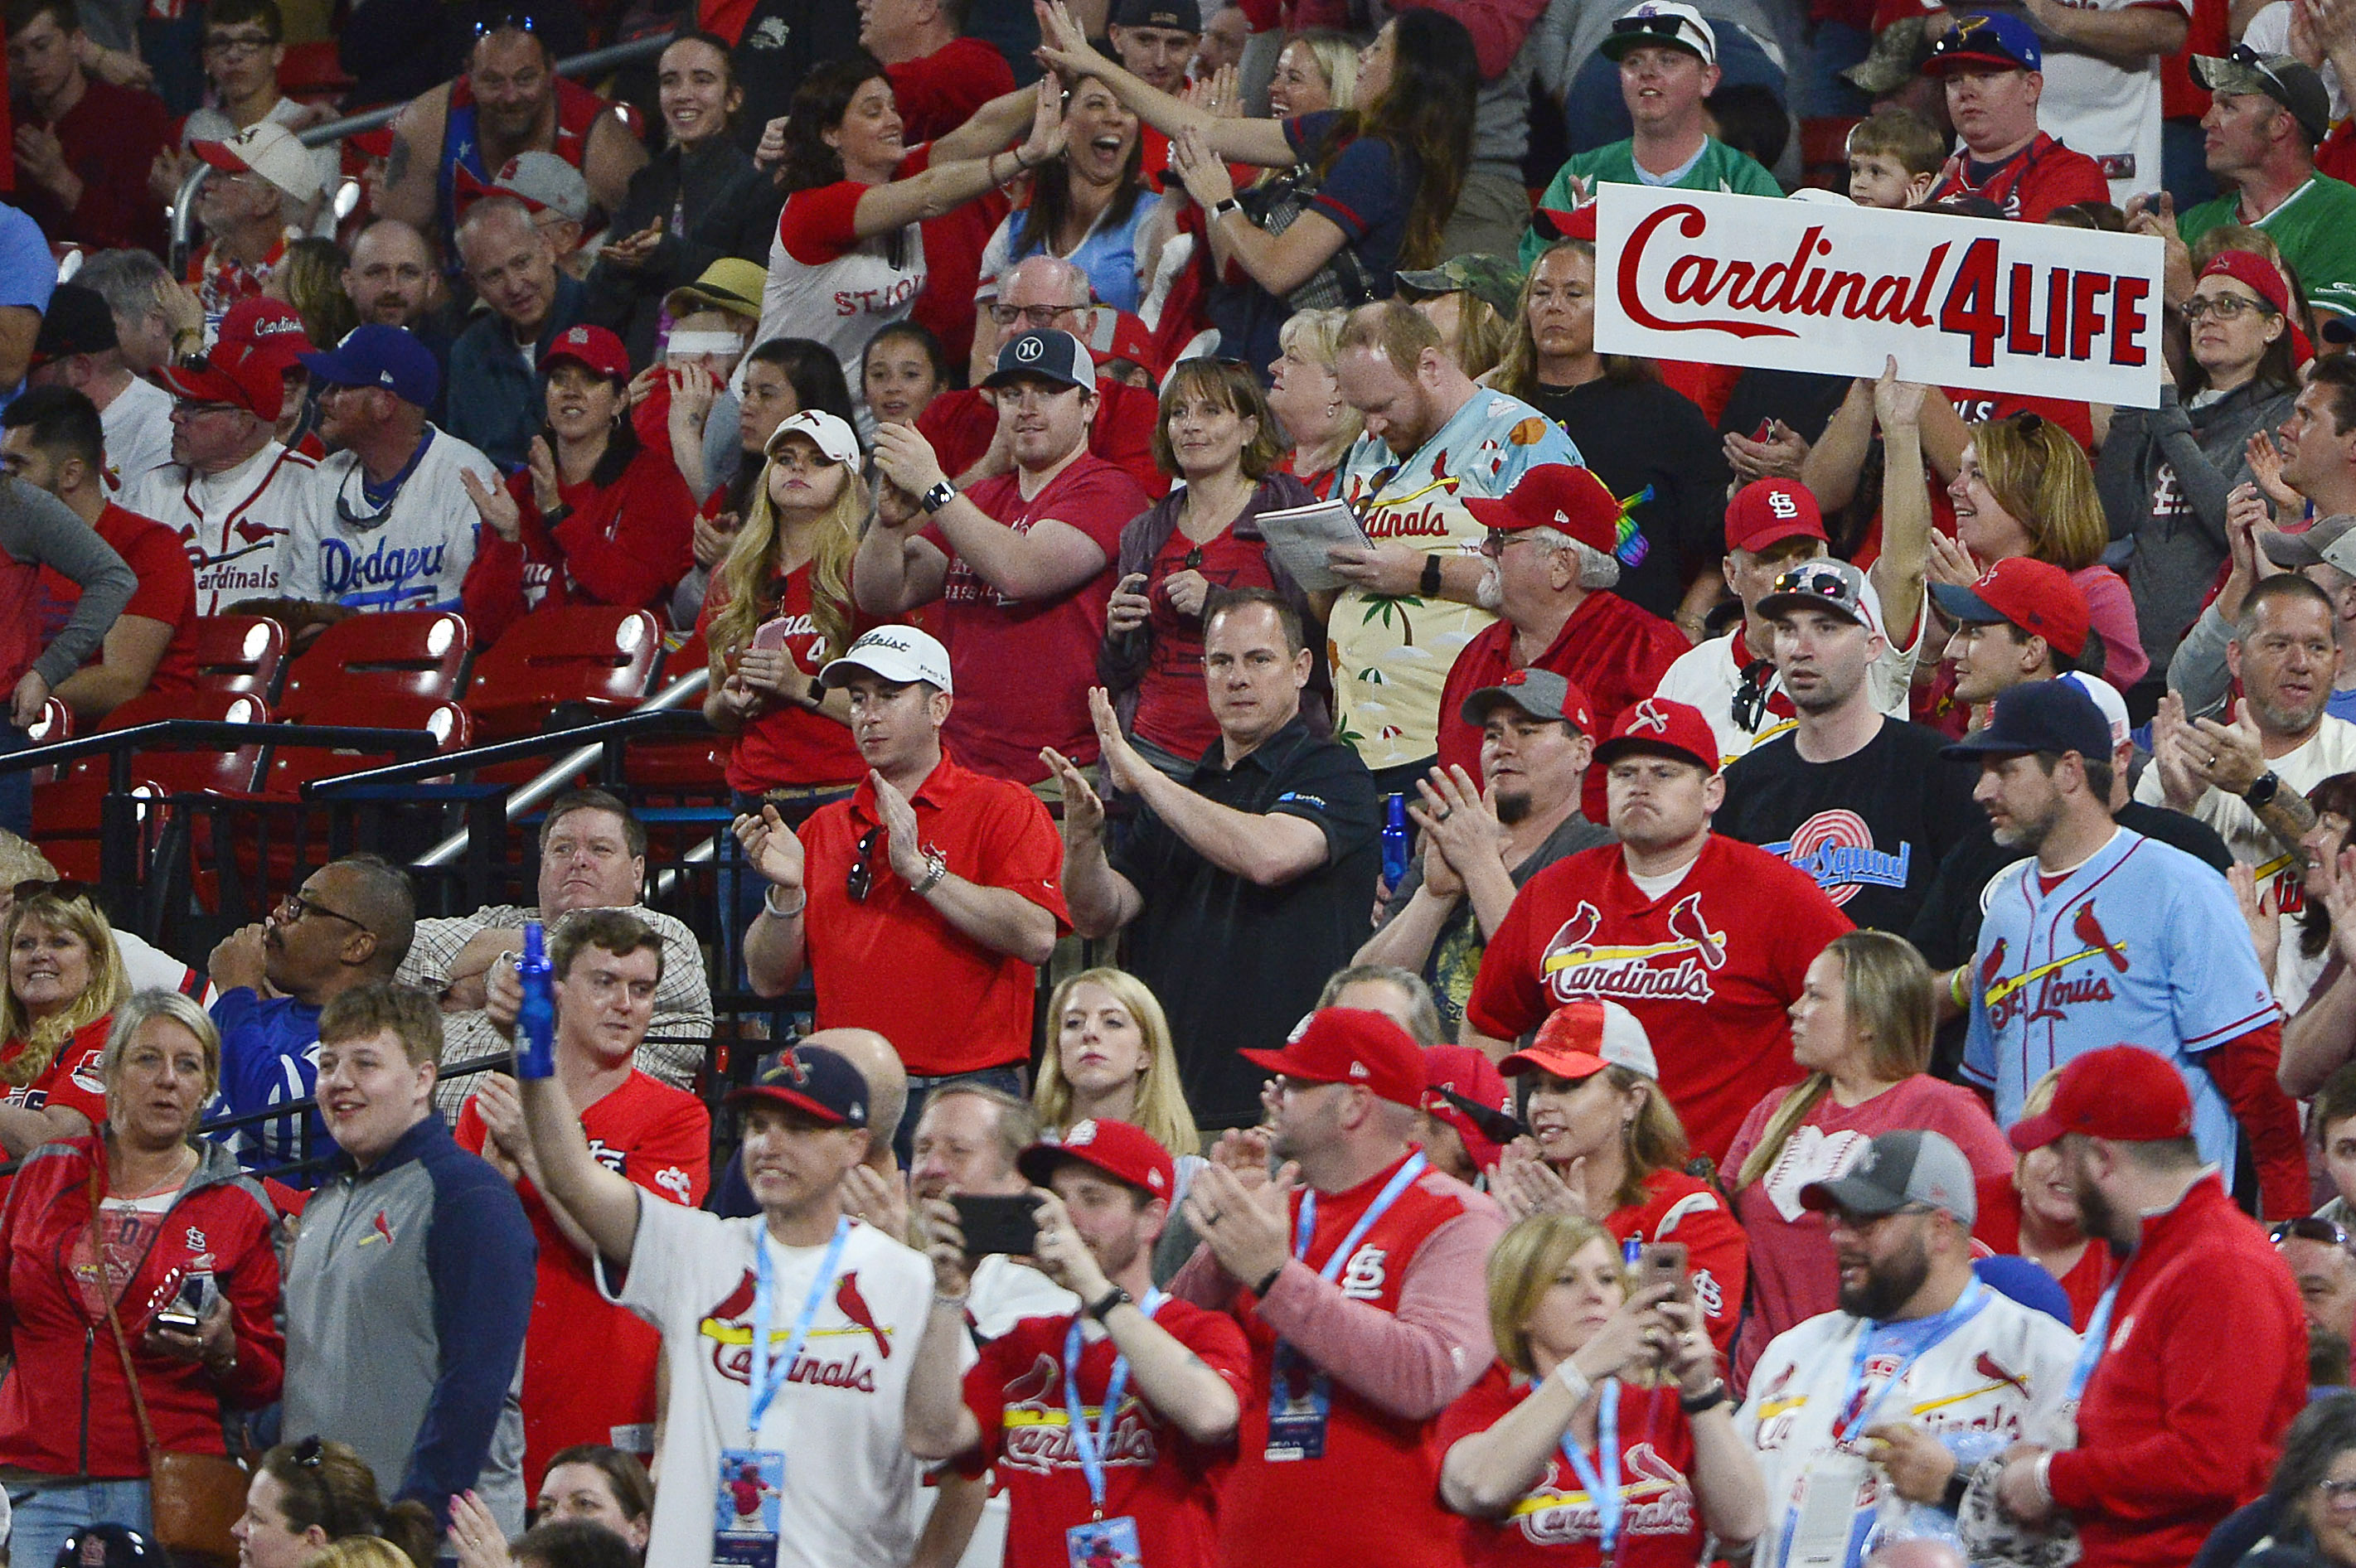 Woman flashes Jumbotron during Cardinals game in St. Louis